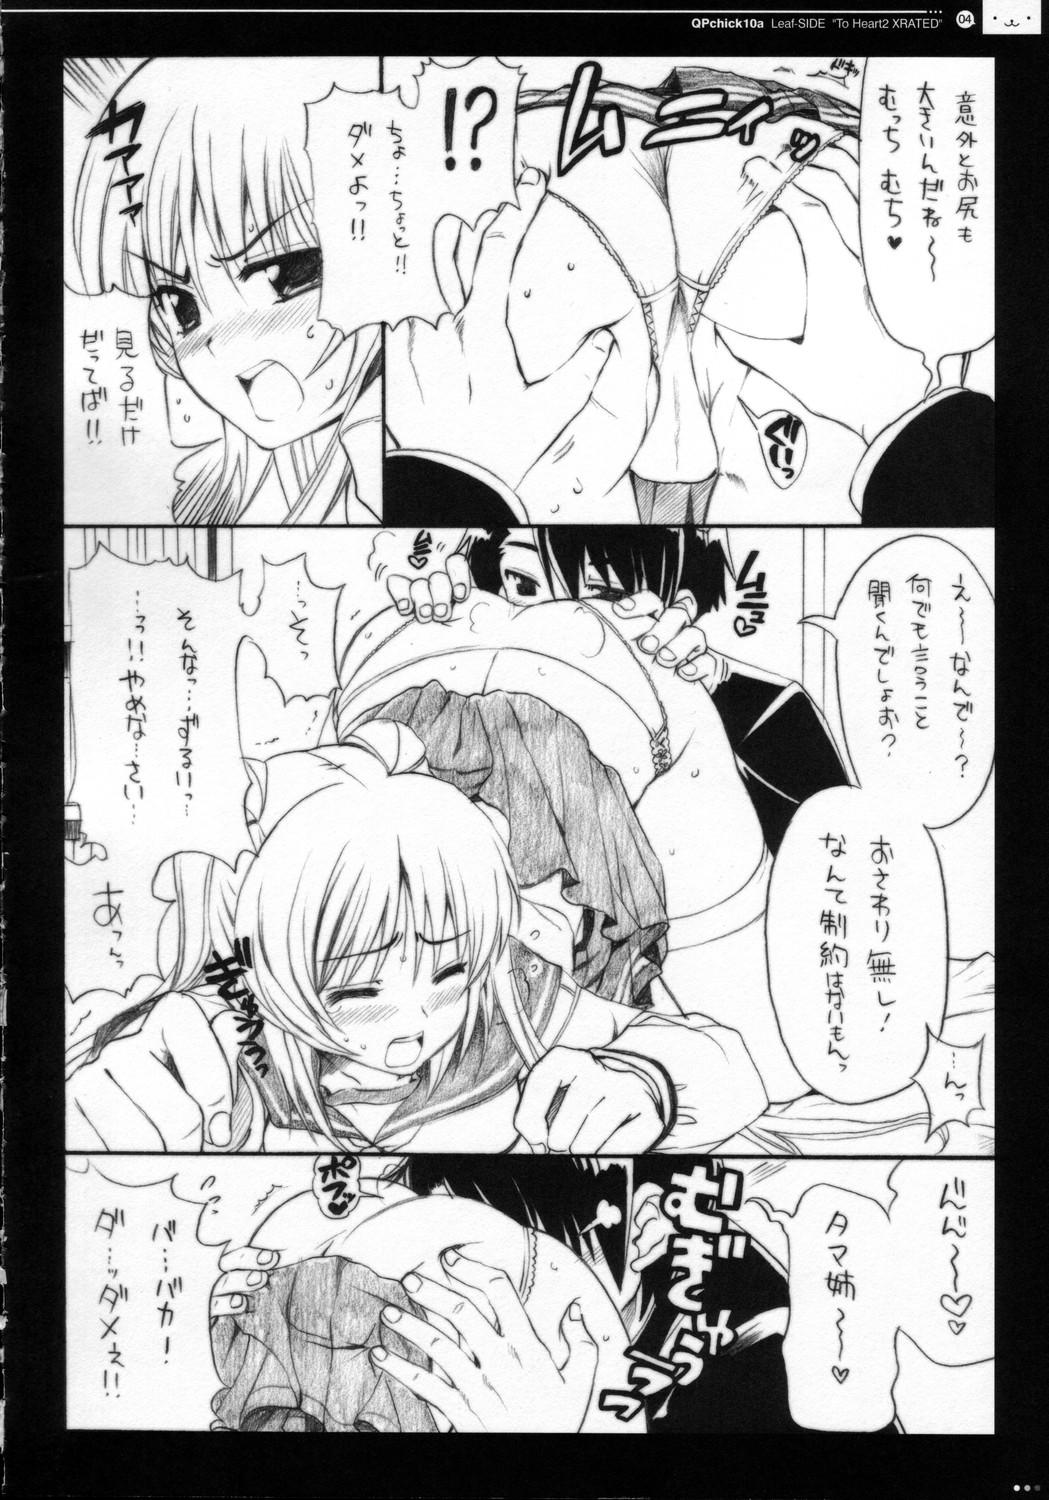 Cum Swallowing (C69) [QP:flapper (Pimeco, Tometa)] QPchick10a Leaf-SIDE -Re:Re:CHERRY- (ToHeart 2) - Toheart2 Long Hair - Page 7